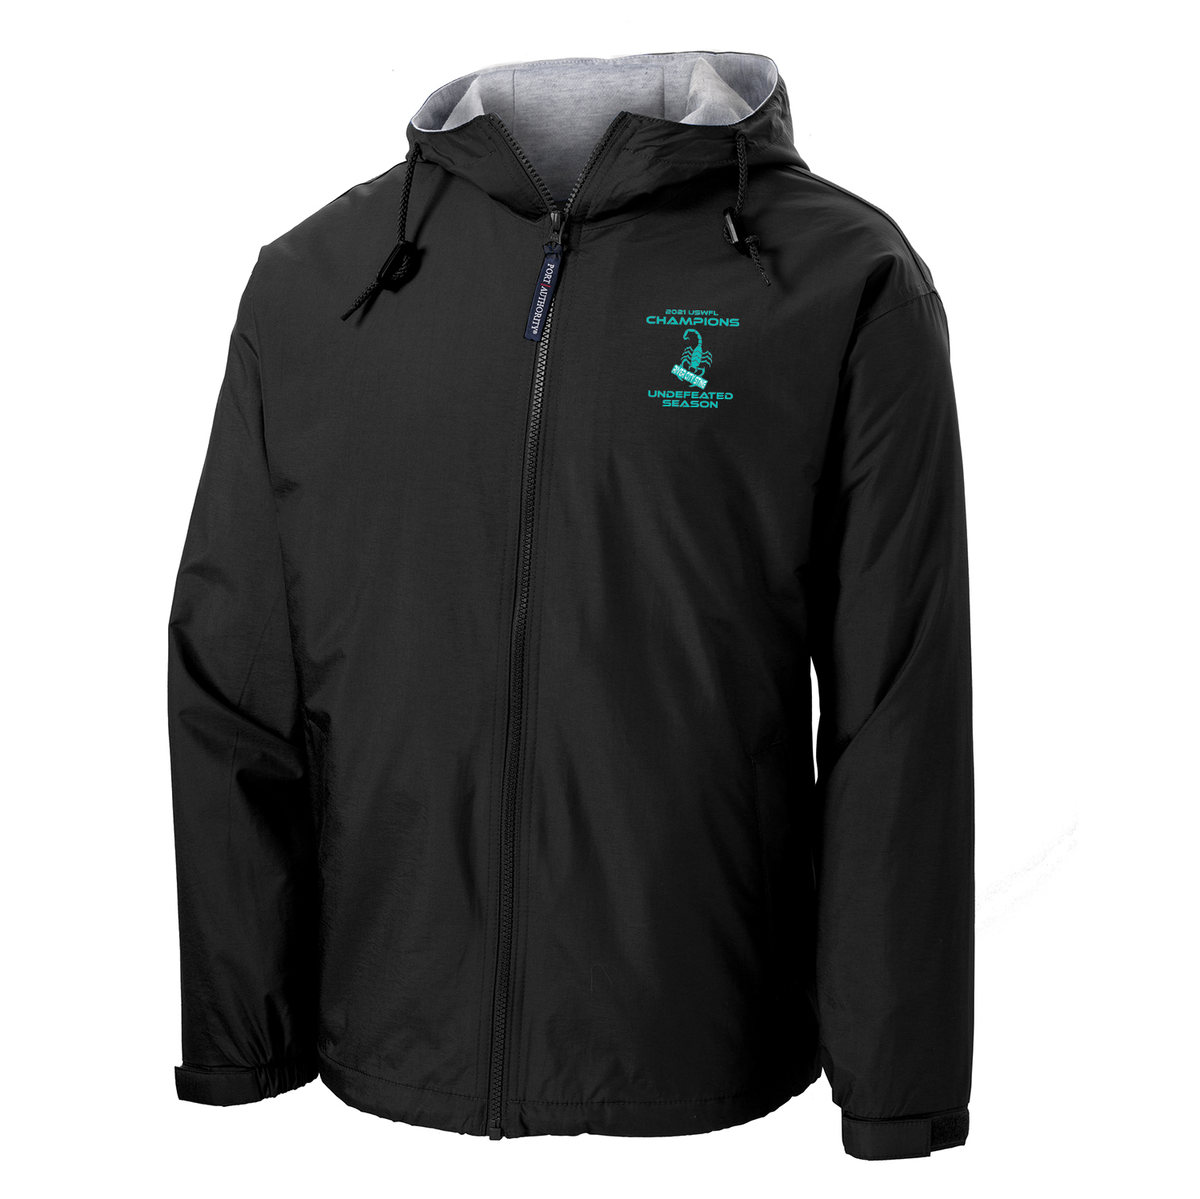 River City Sting Hooded Jacket